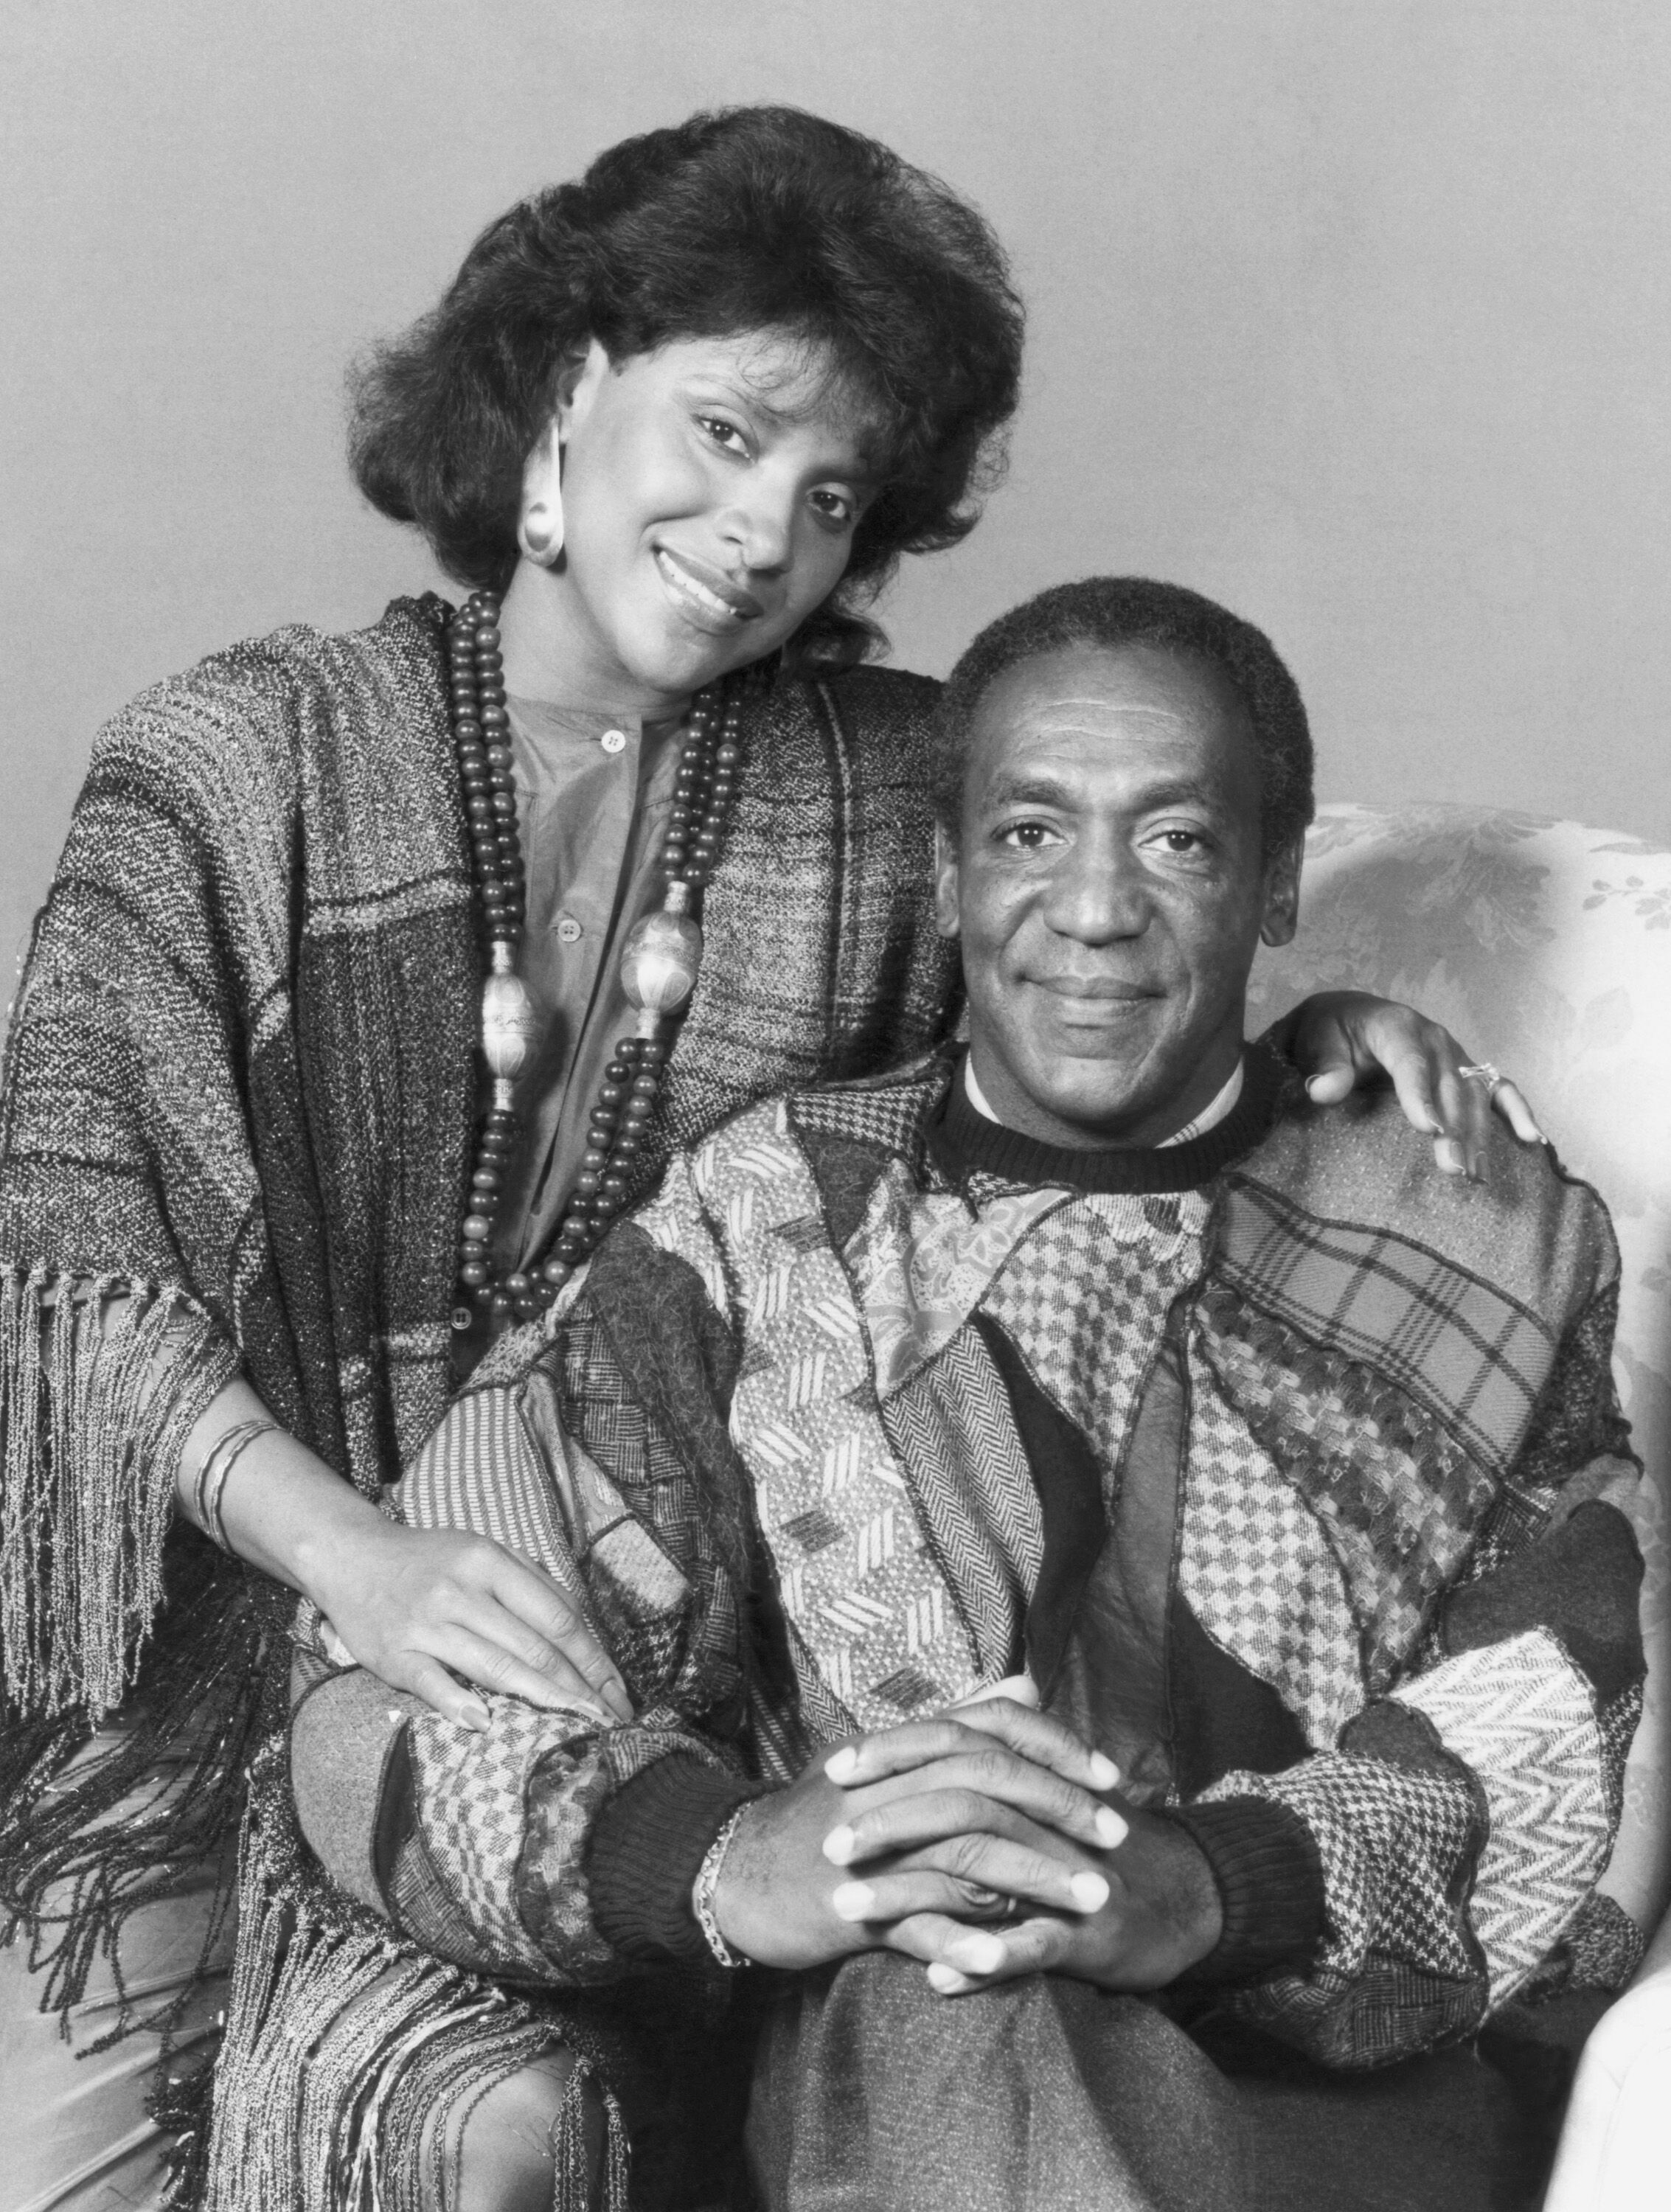  Phylicia Rashad as Clair Hanks Huxtable, Bill Cosby as Dr. Heathcliff 'Cliff' Huxtable in "The Cosby Show" | Source: Getty Images